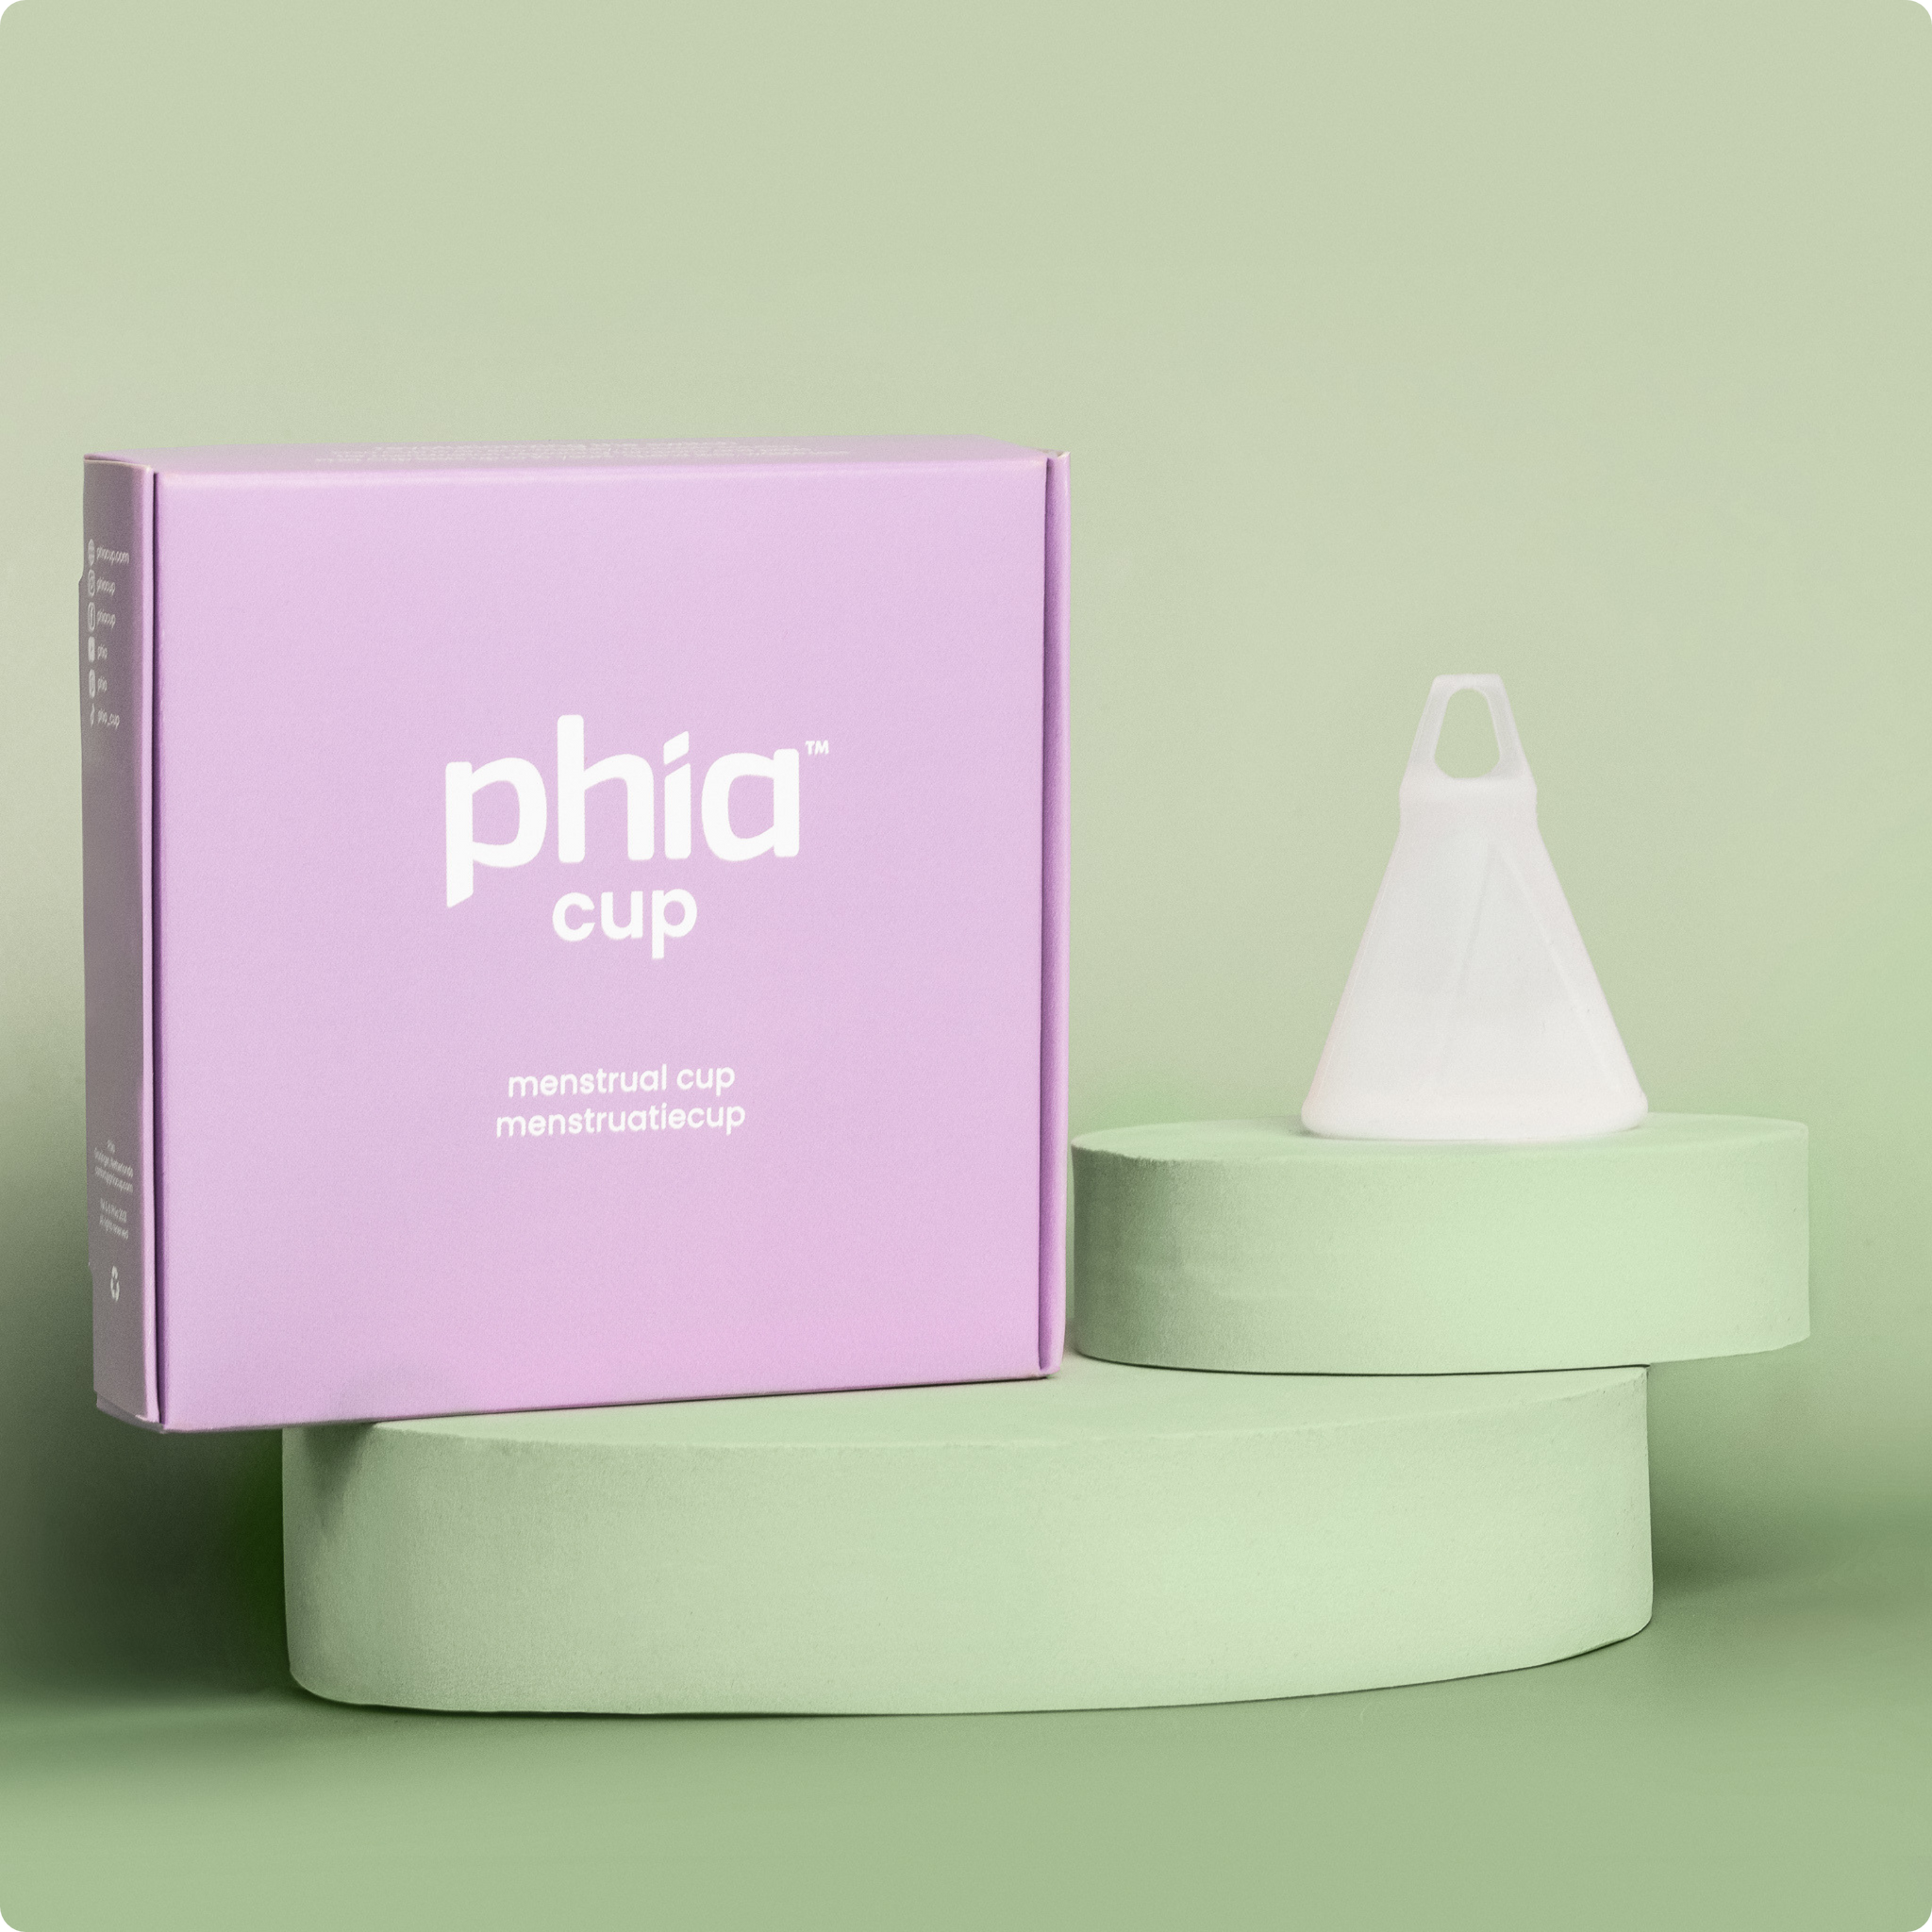 Phia Menstrual Cup with the packaging on a display